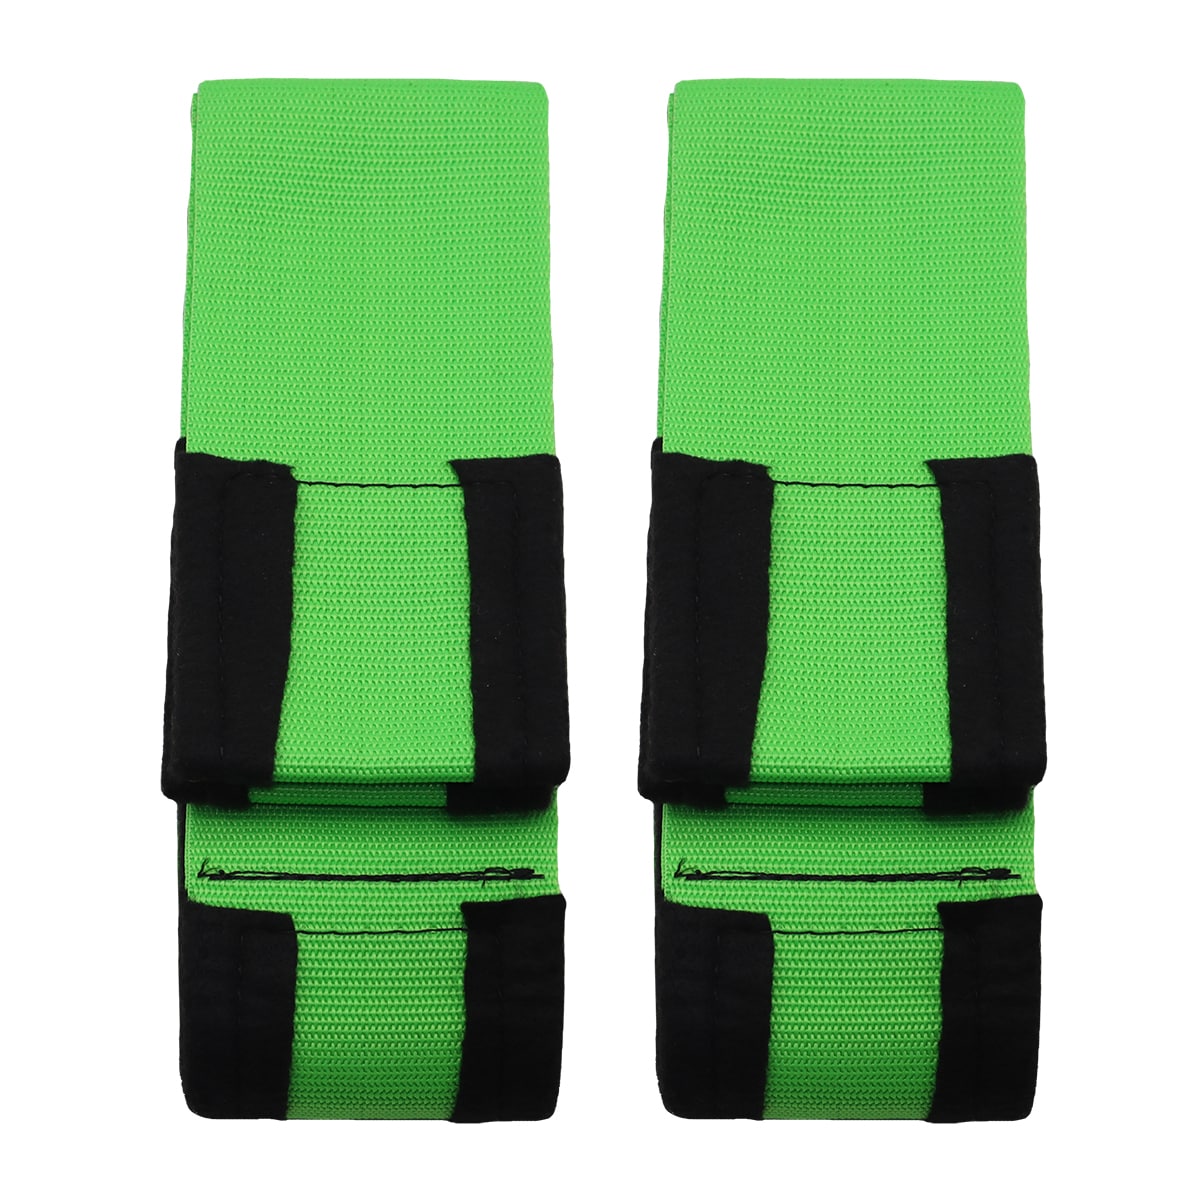 Shoulder Dolly Moving Straps - Lifting Straps - Move, Lift, And Secure  Furniture, Appliances, Heavy, Bulky Objects Safely, Efficiently, More  Easily Like the Pros - Essential Moving Supplies 